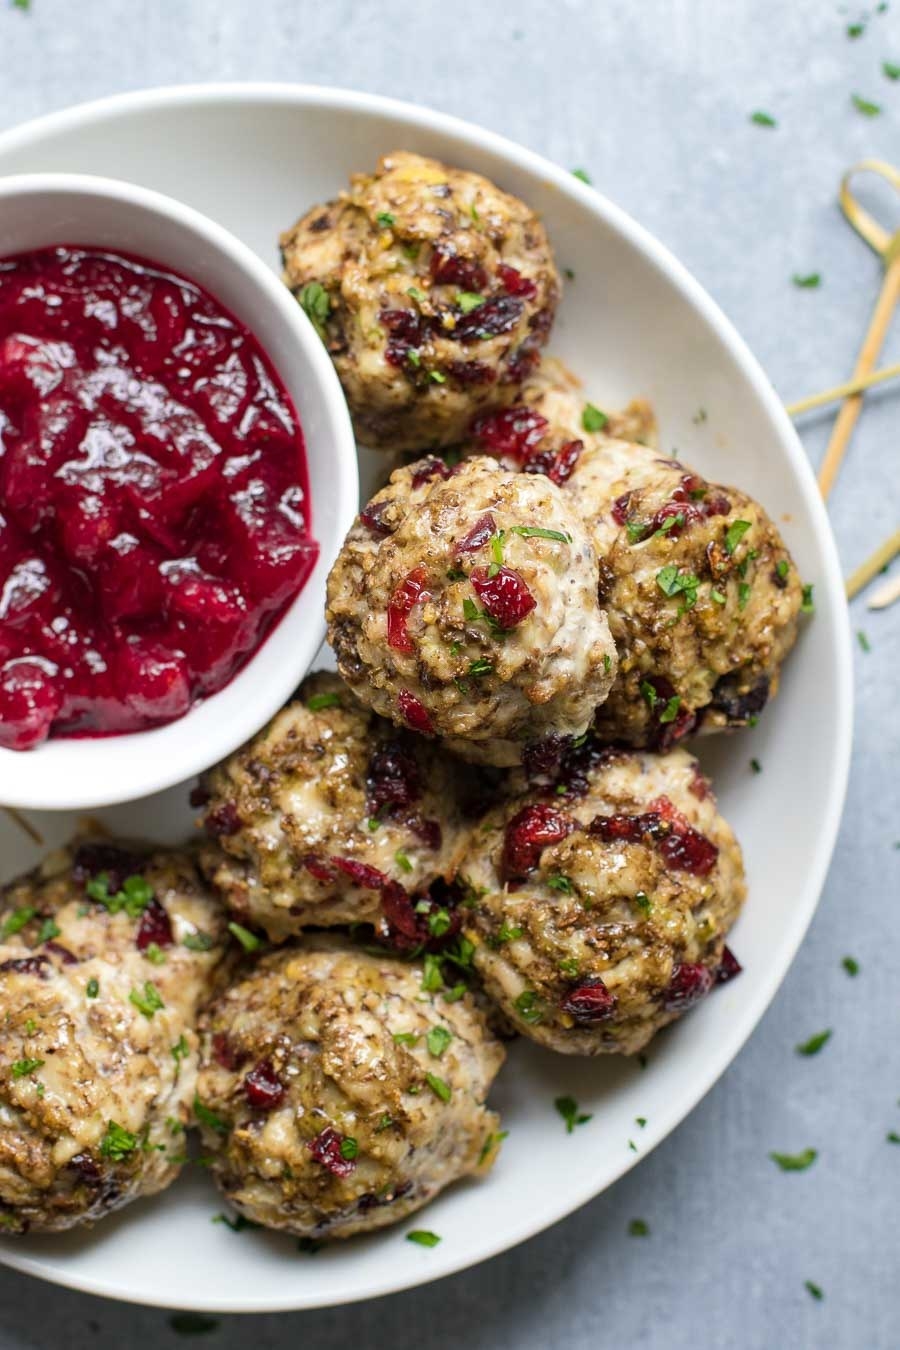 A plate of turkey meatballs with cranberries, fresh herbs, and cranberry sauce for dipping.